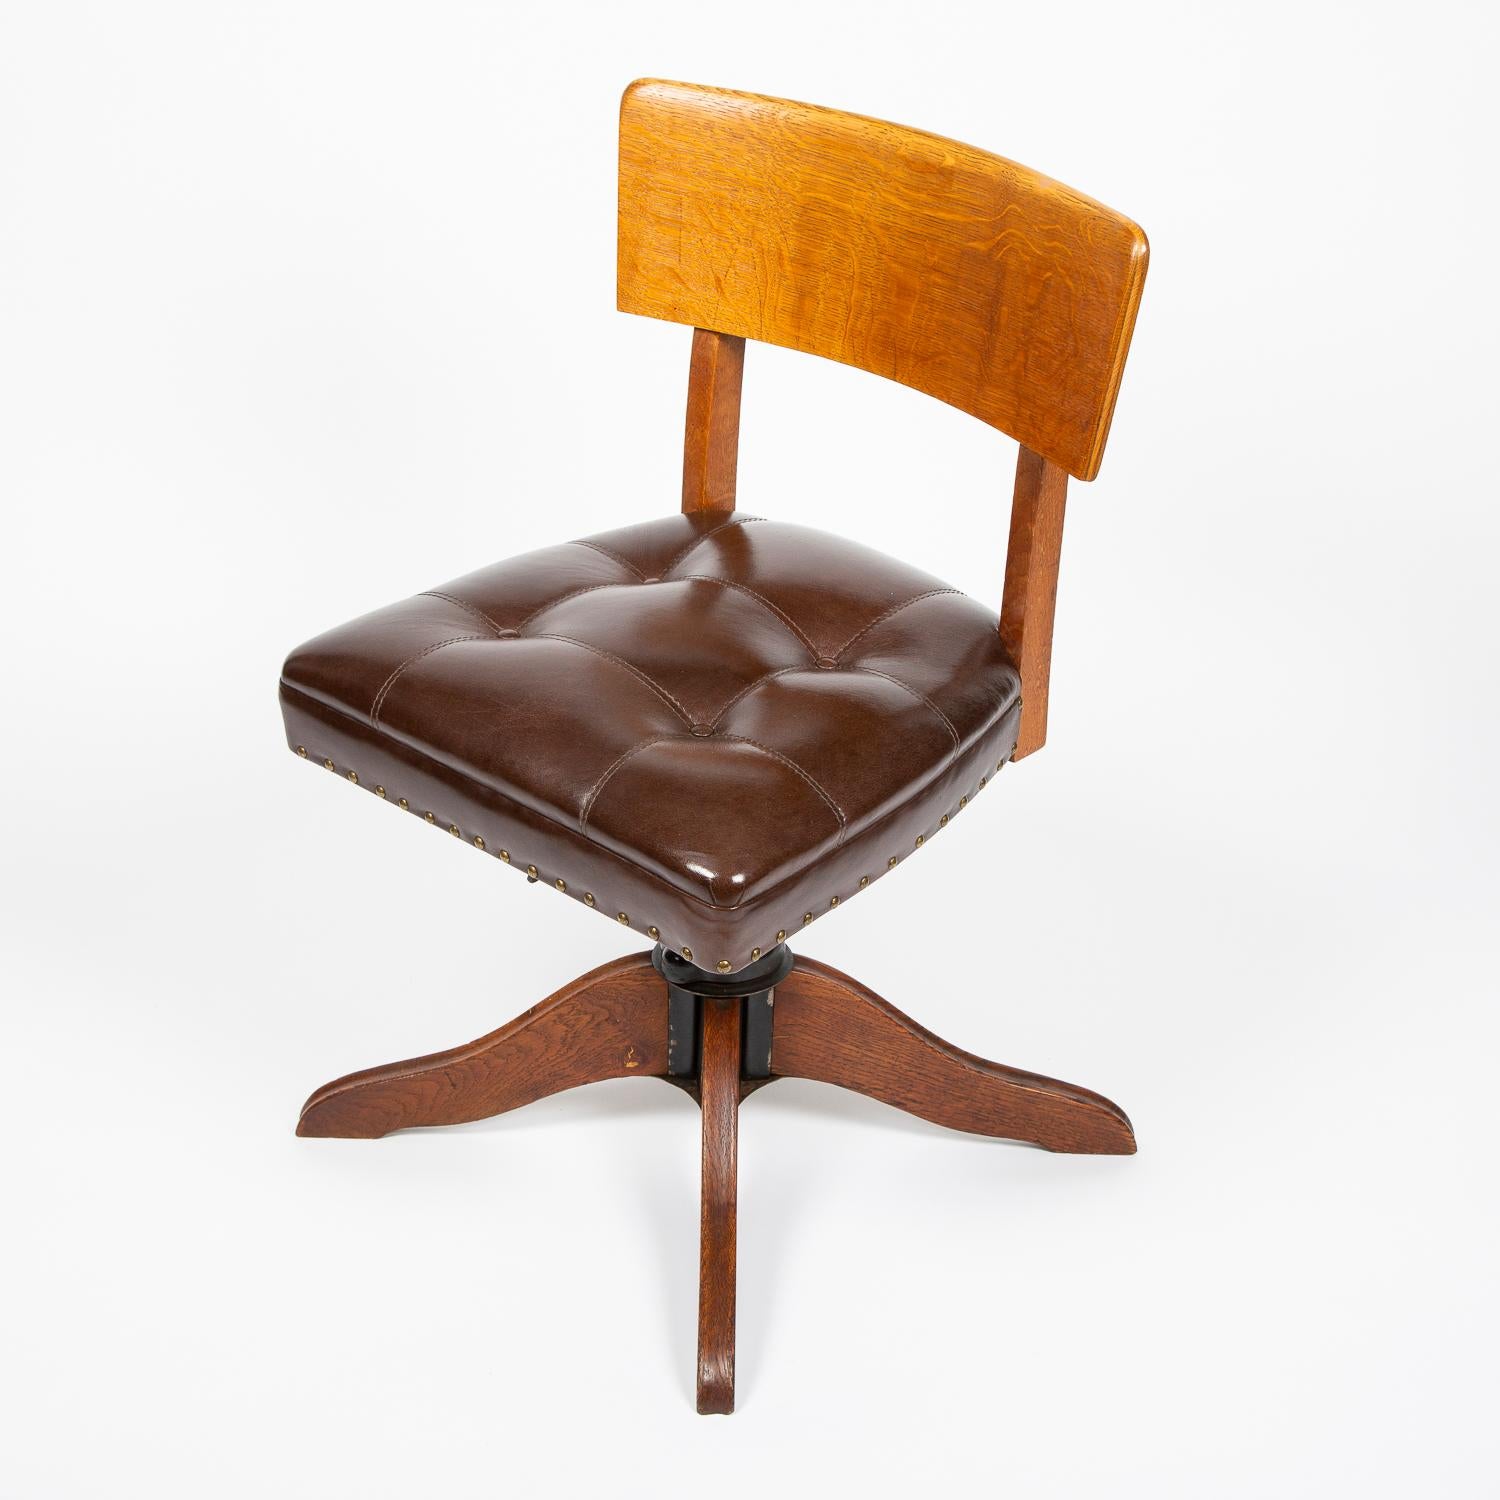 Oak desk chair with buttoned brown leather seat.

Adjustable with swivel seat.

SMV mark cast into metalwork.